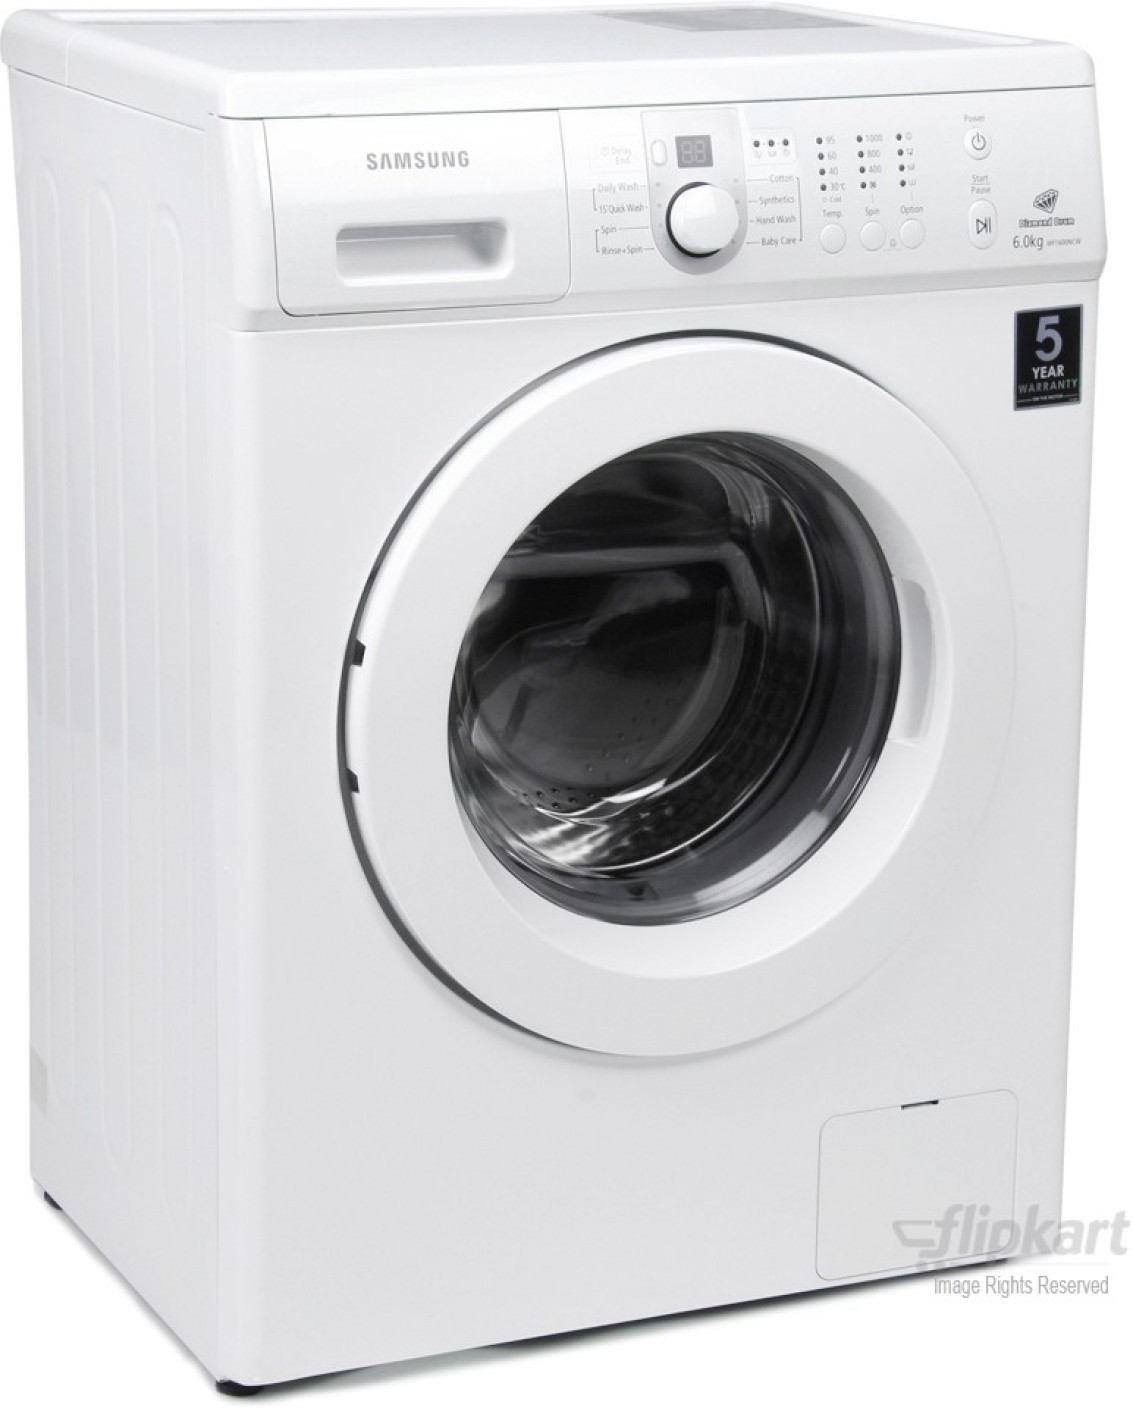 Samsung fully automatic front load washing machine user manual 5891